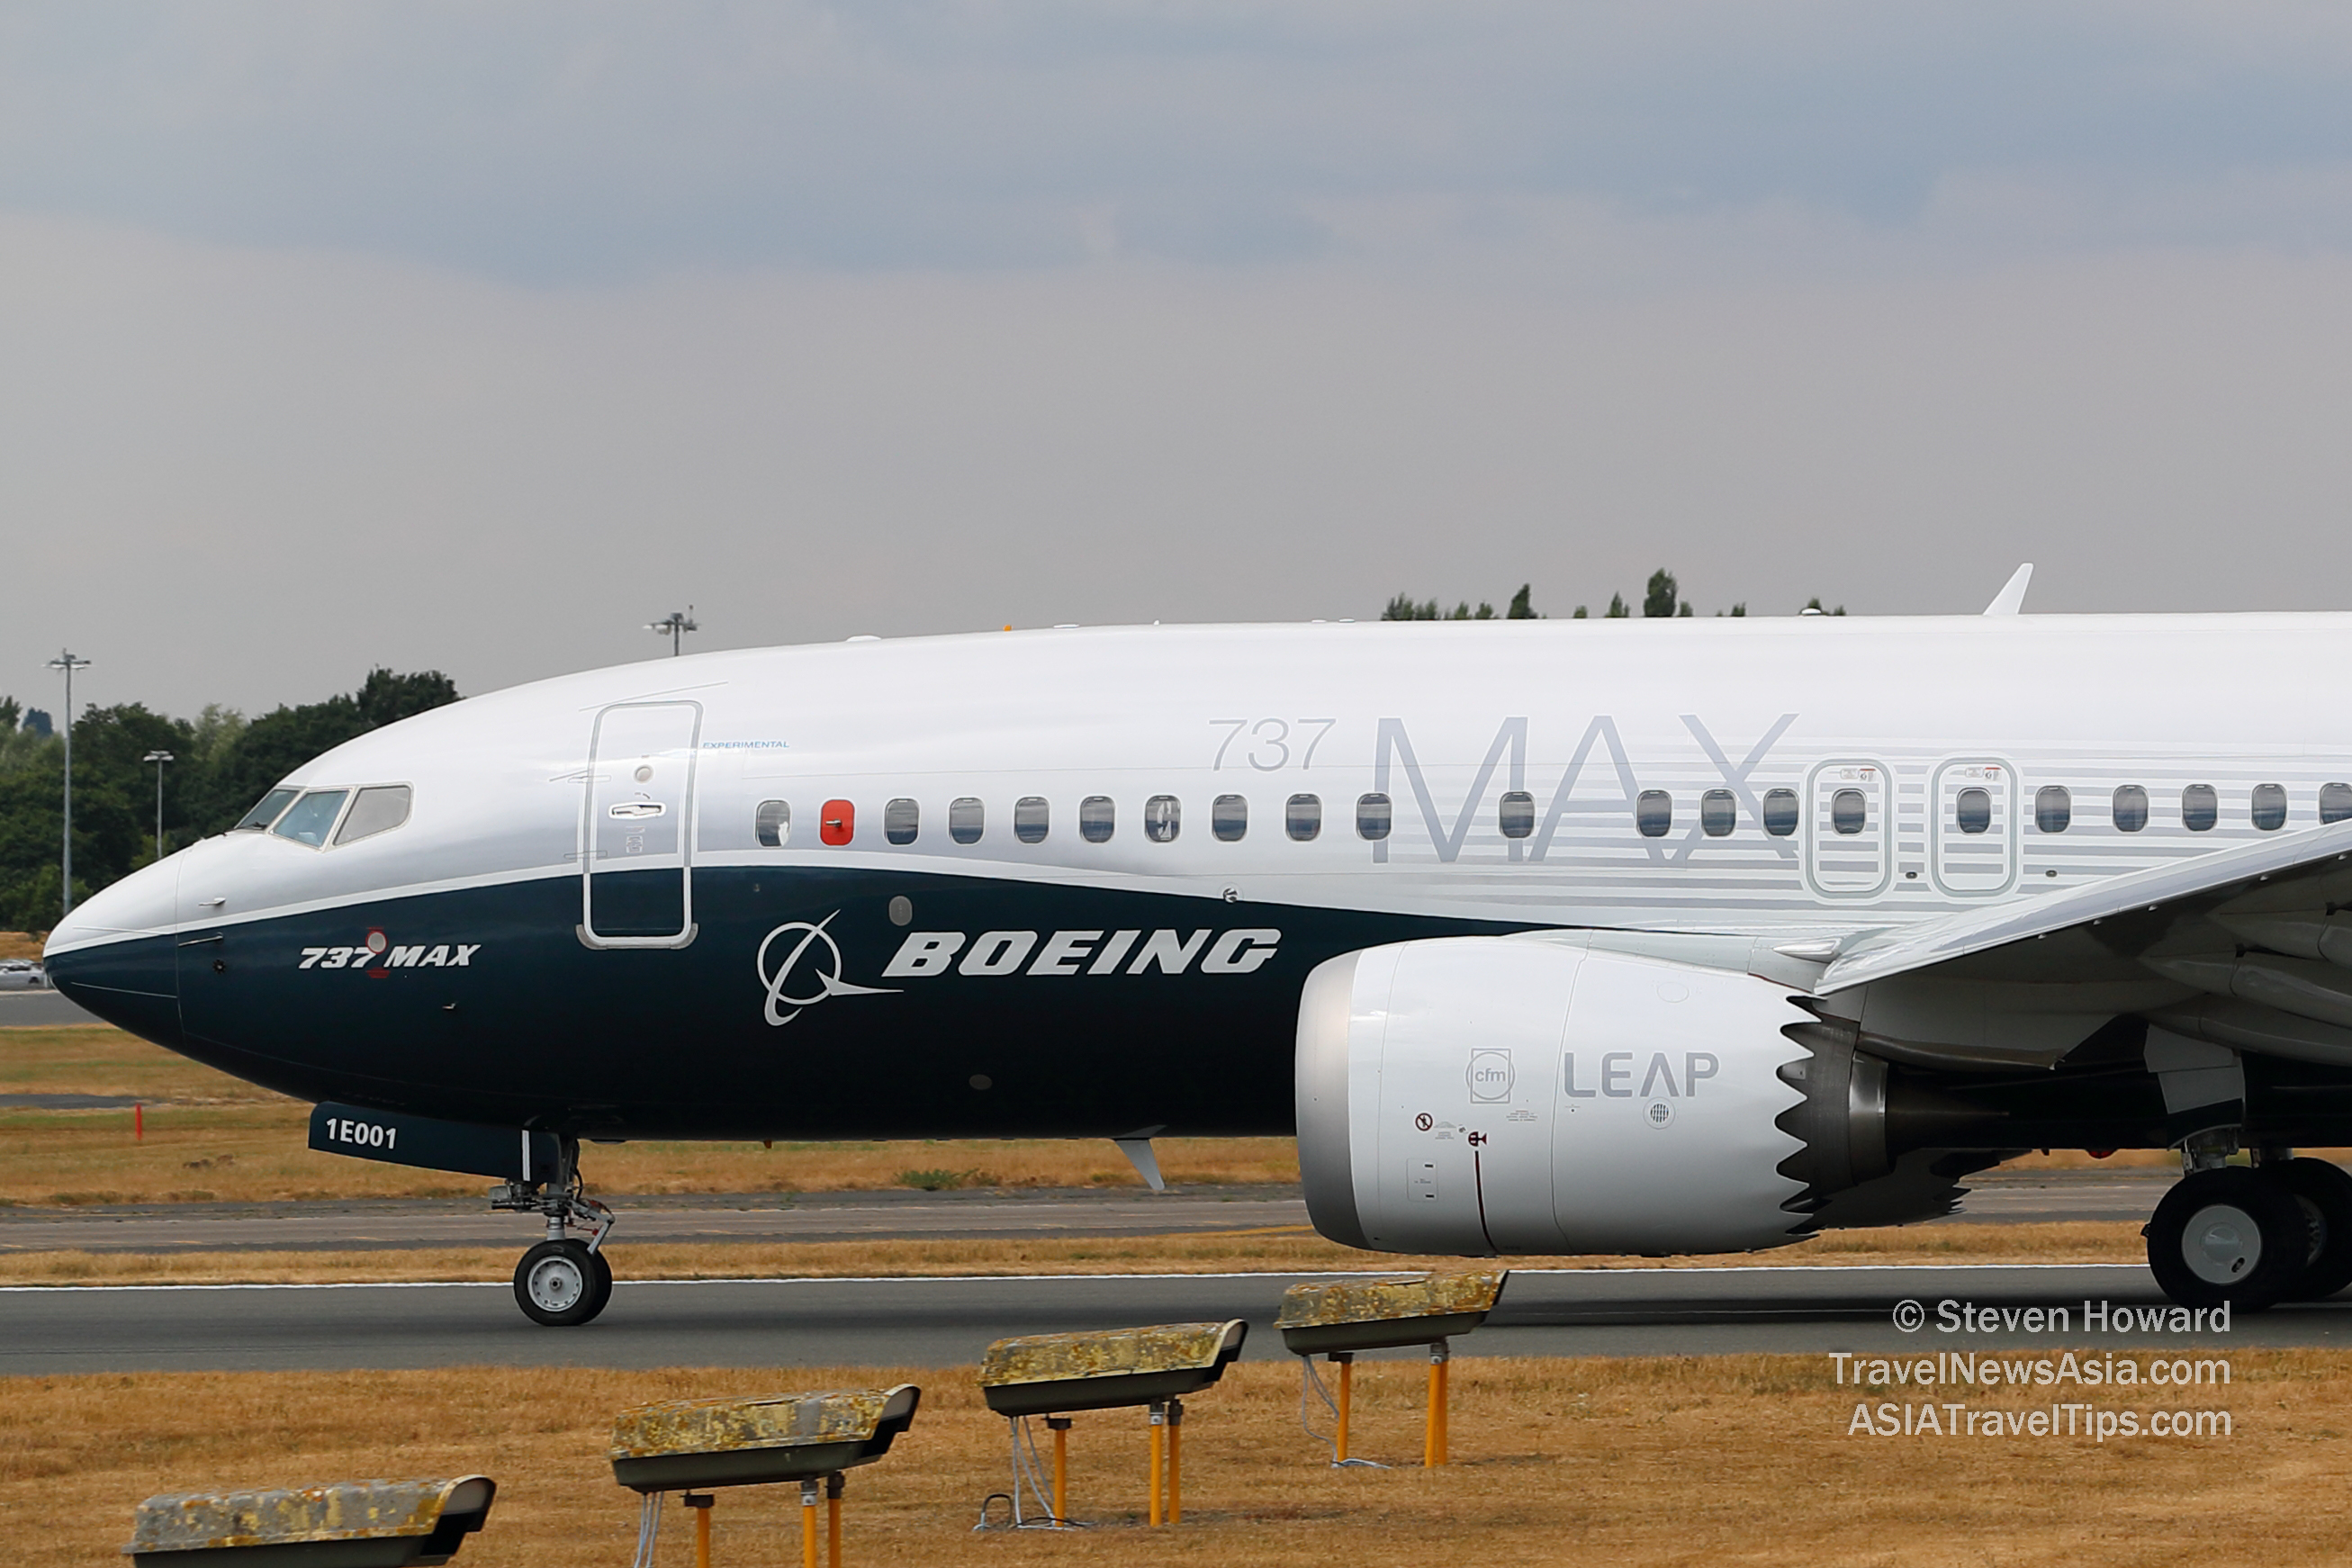 Boeing 737 MAX 7 reg: N720IS. Picture by Steven Howard of TravelNewsAsia.com Click to enlarge.